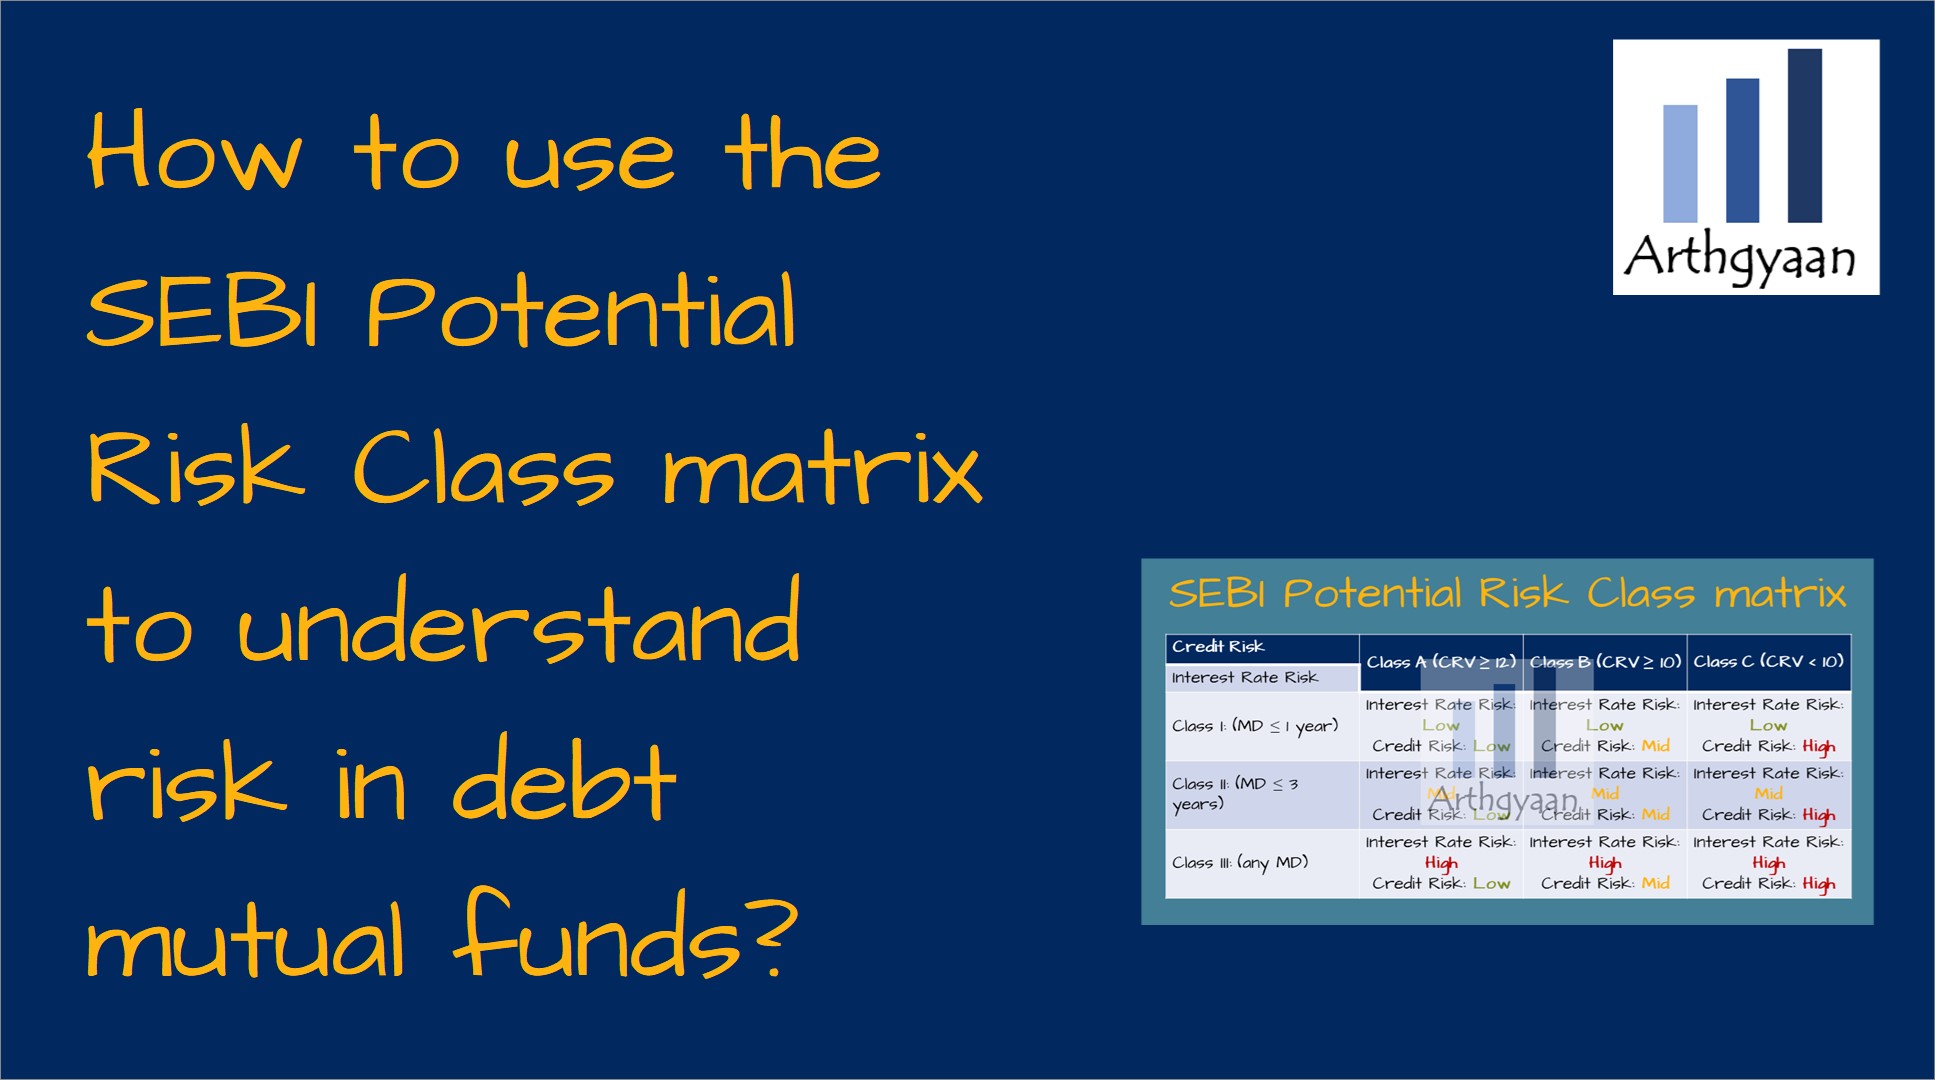 How to use the SEBI Potential Risk Class matrix to understand risk in debt mutual funds?